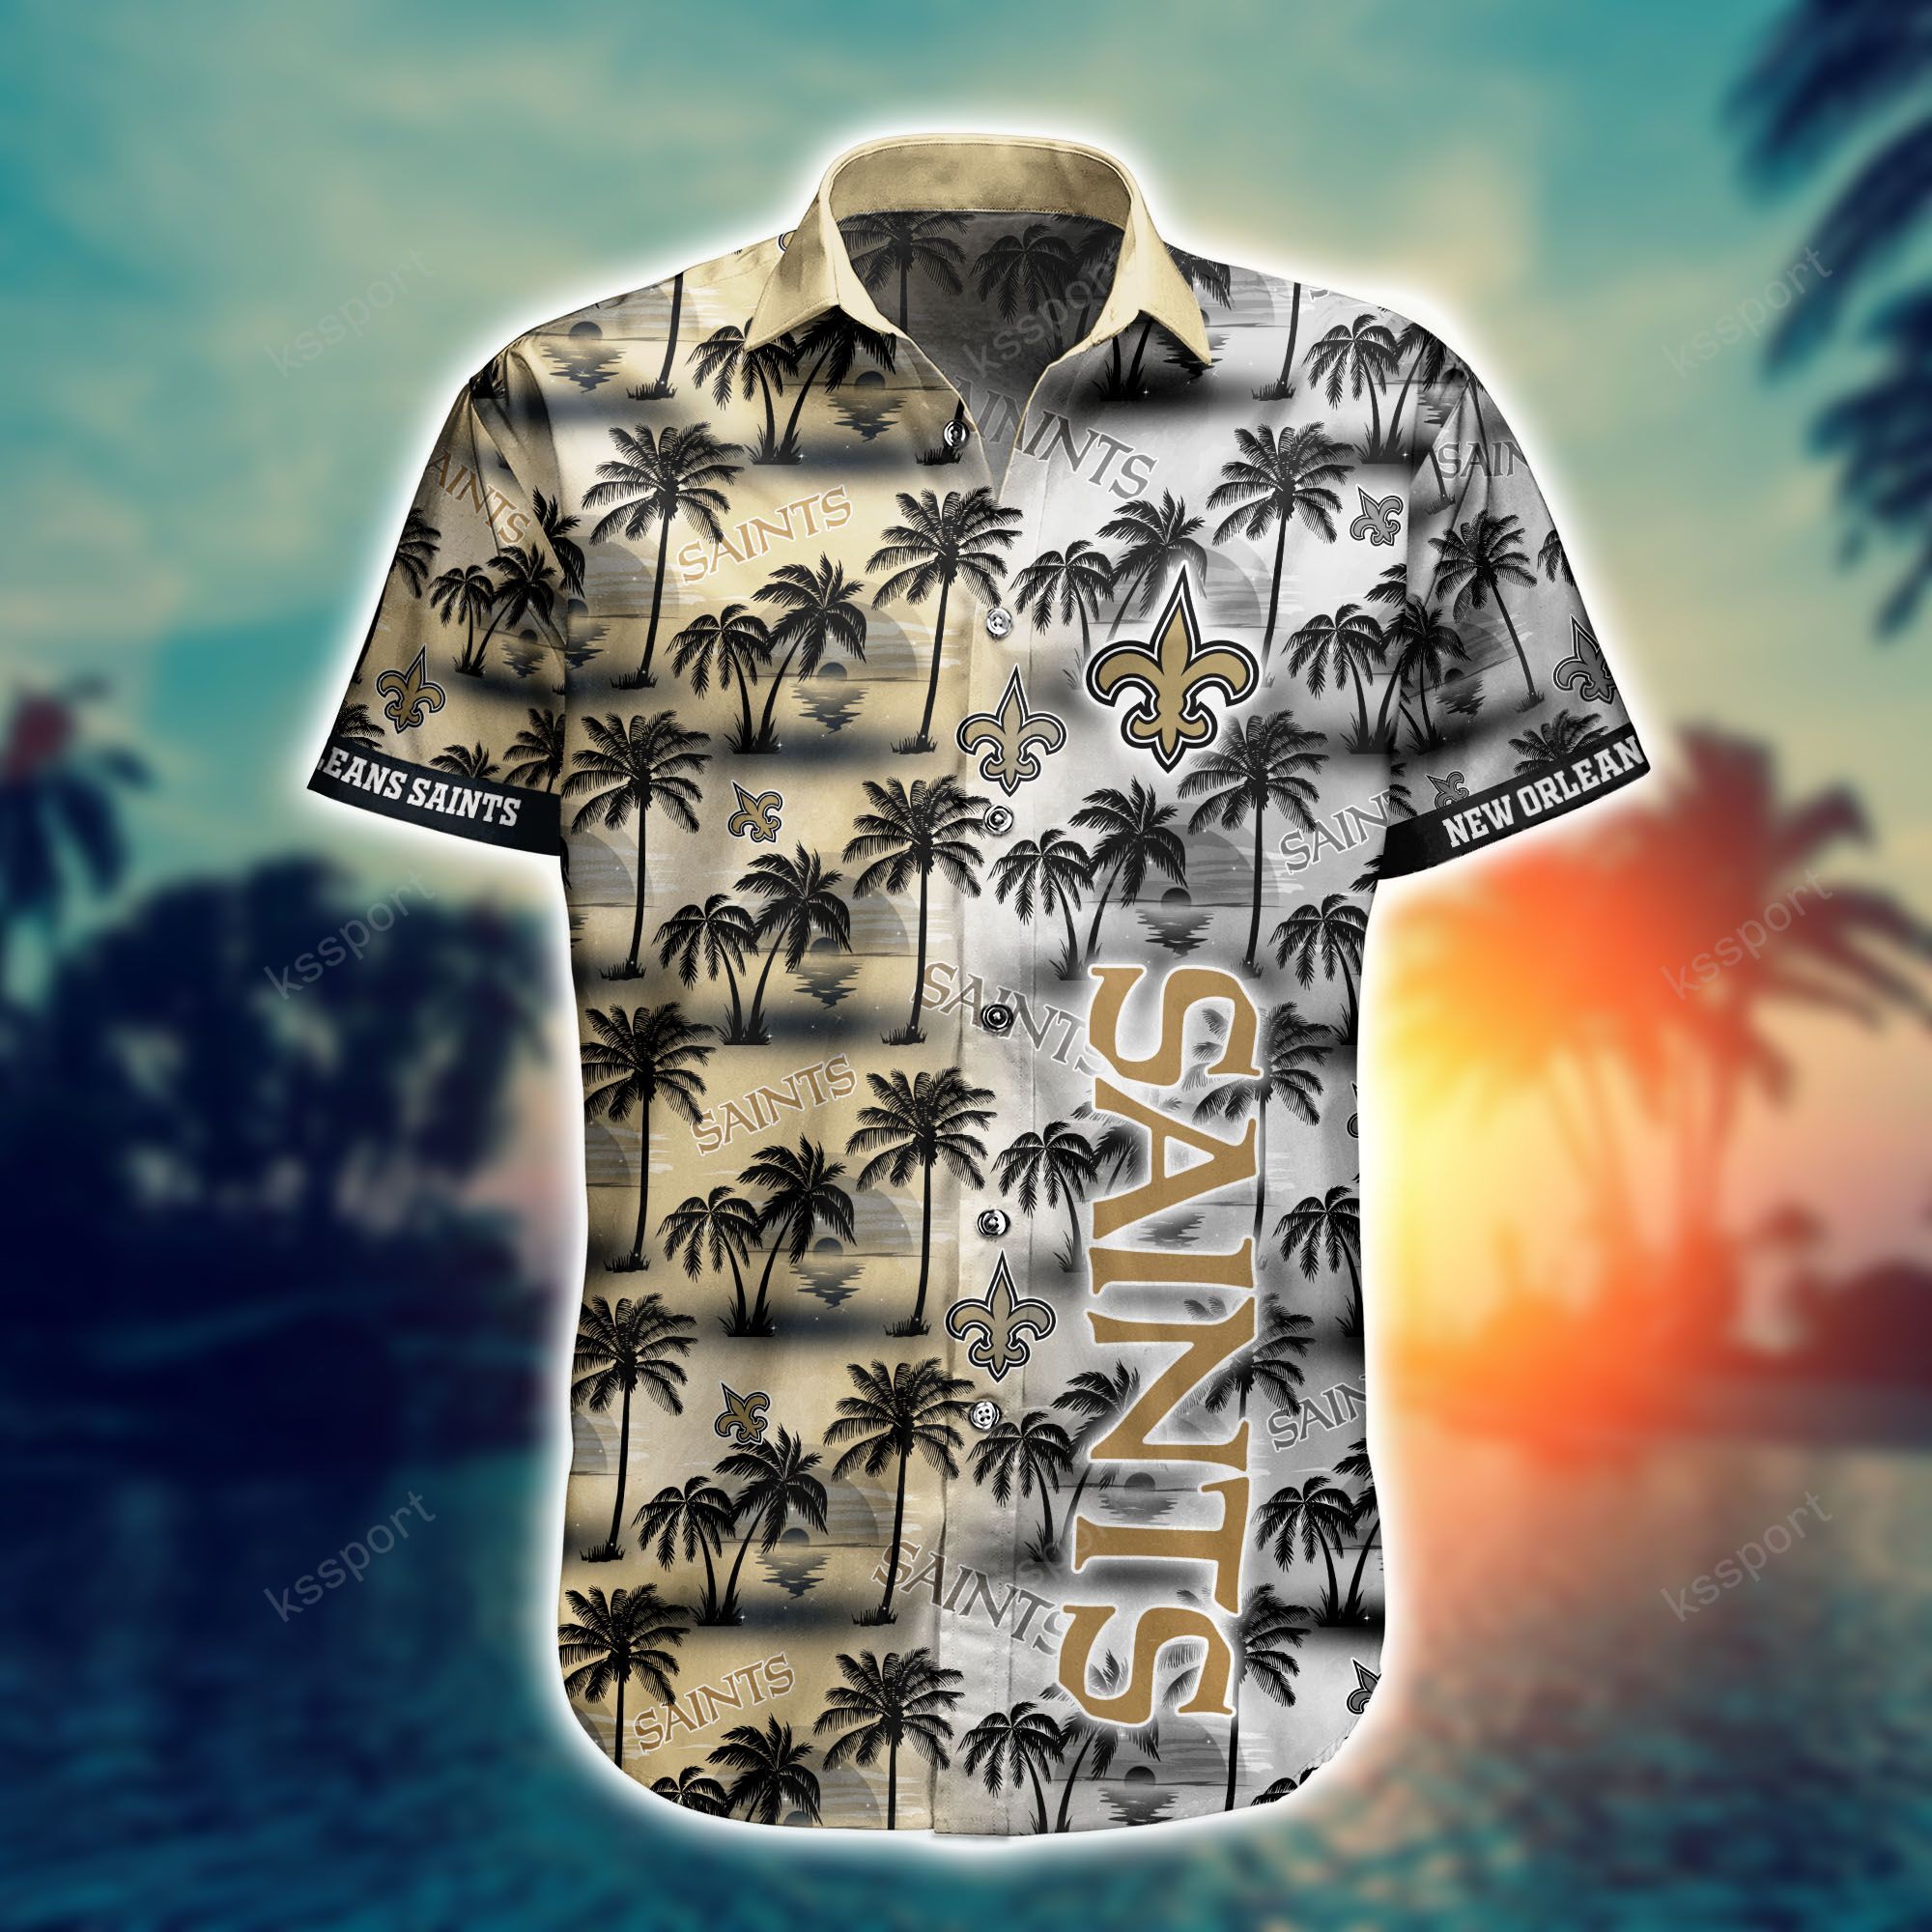 Top cool Hawaiian shirt 2022 - Make sure you get yours today before they run out! 199